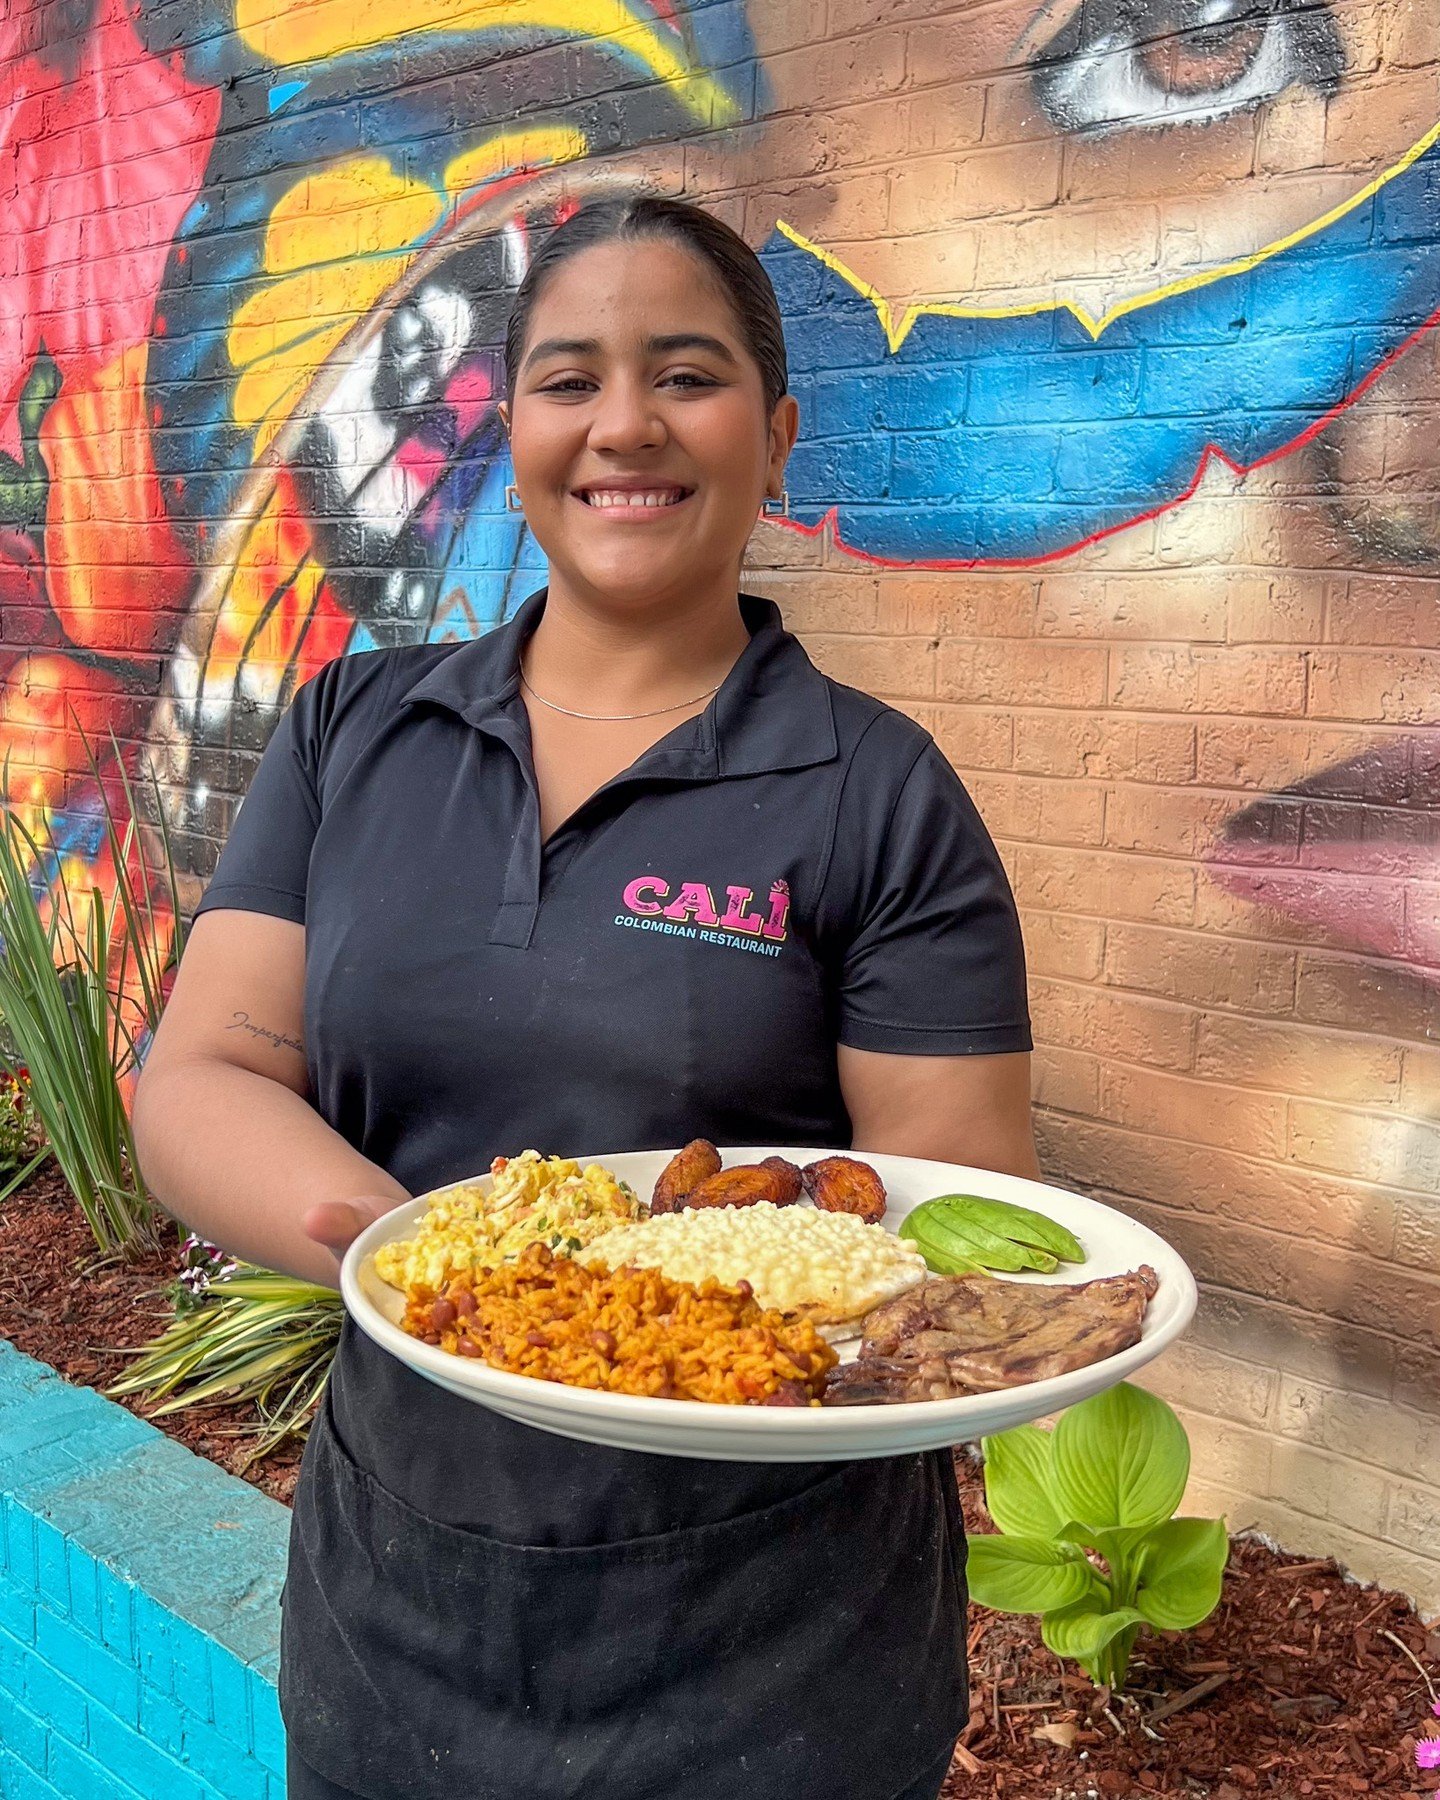 You, me, and breakfast at Cali? 🤩

📍 5920 South Blvd, Charlotte NC

#caliclt #cltfood #cltrestaurants #colombianfood #comidacolombiana #colombianrestaurant #cltfoodie #calicolombian